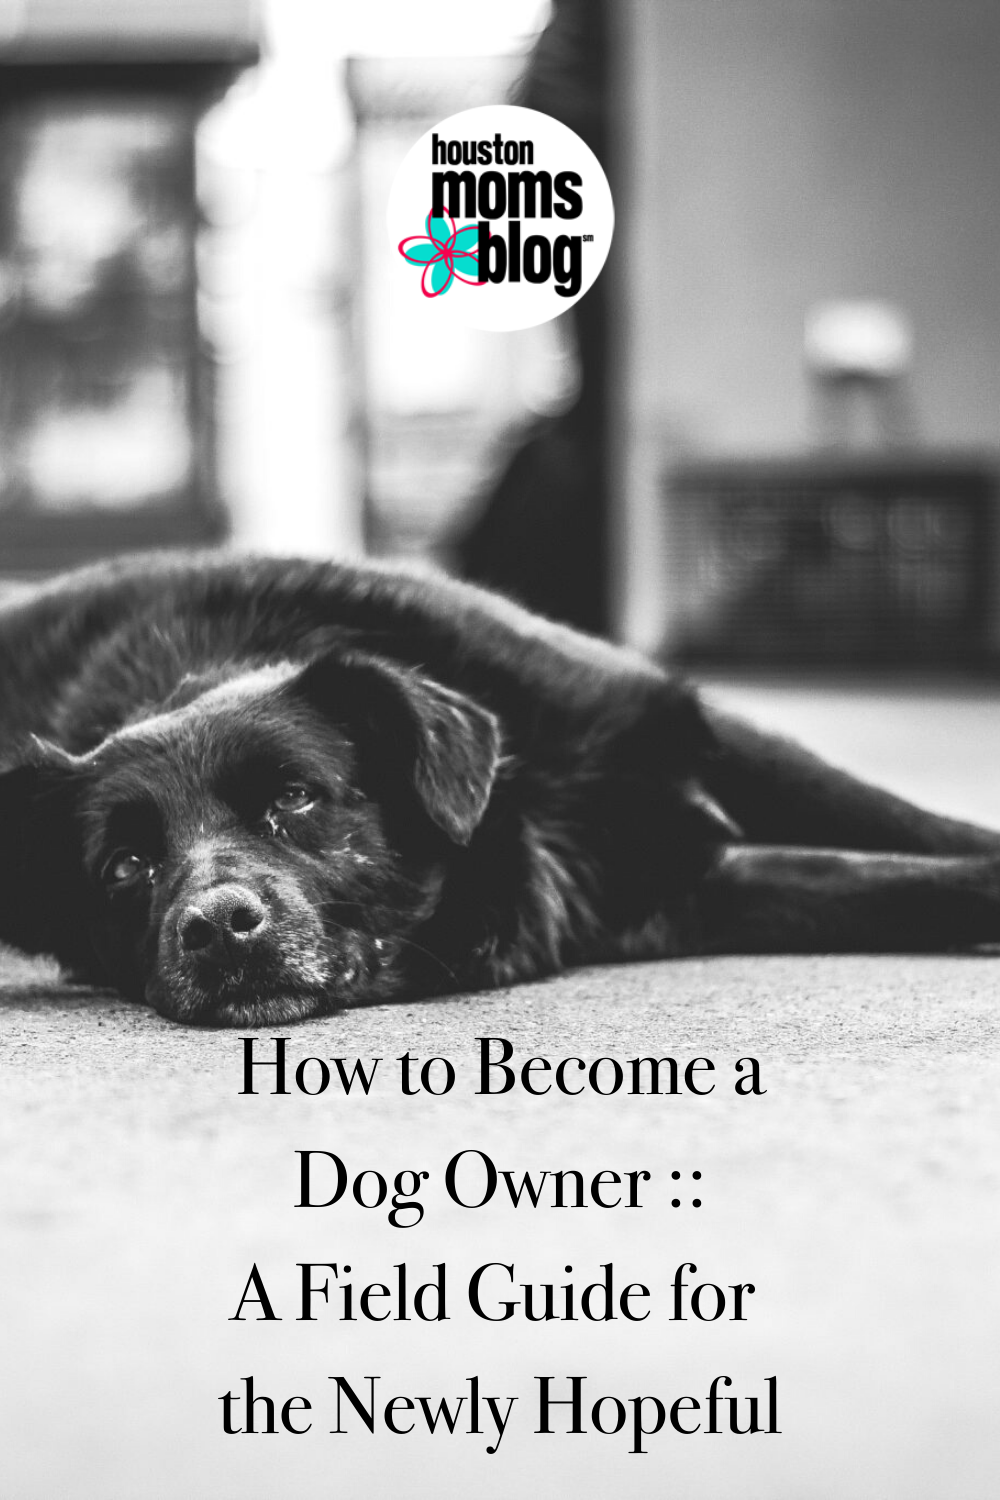 Houston Moms Blog "How to Become a Dog Owner:: A Field Guide for the Newly Hopeful" #houstonmomsblog #momsaroundhouston